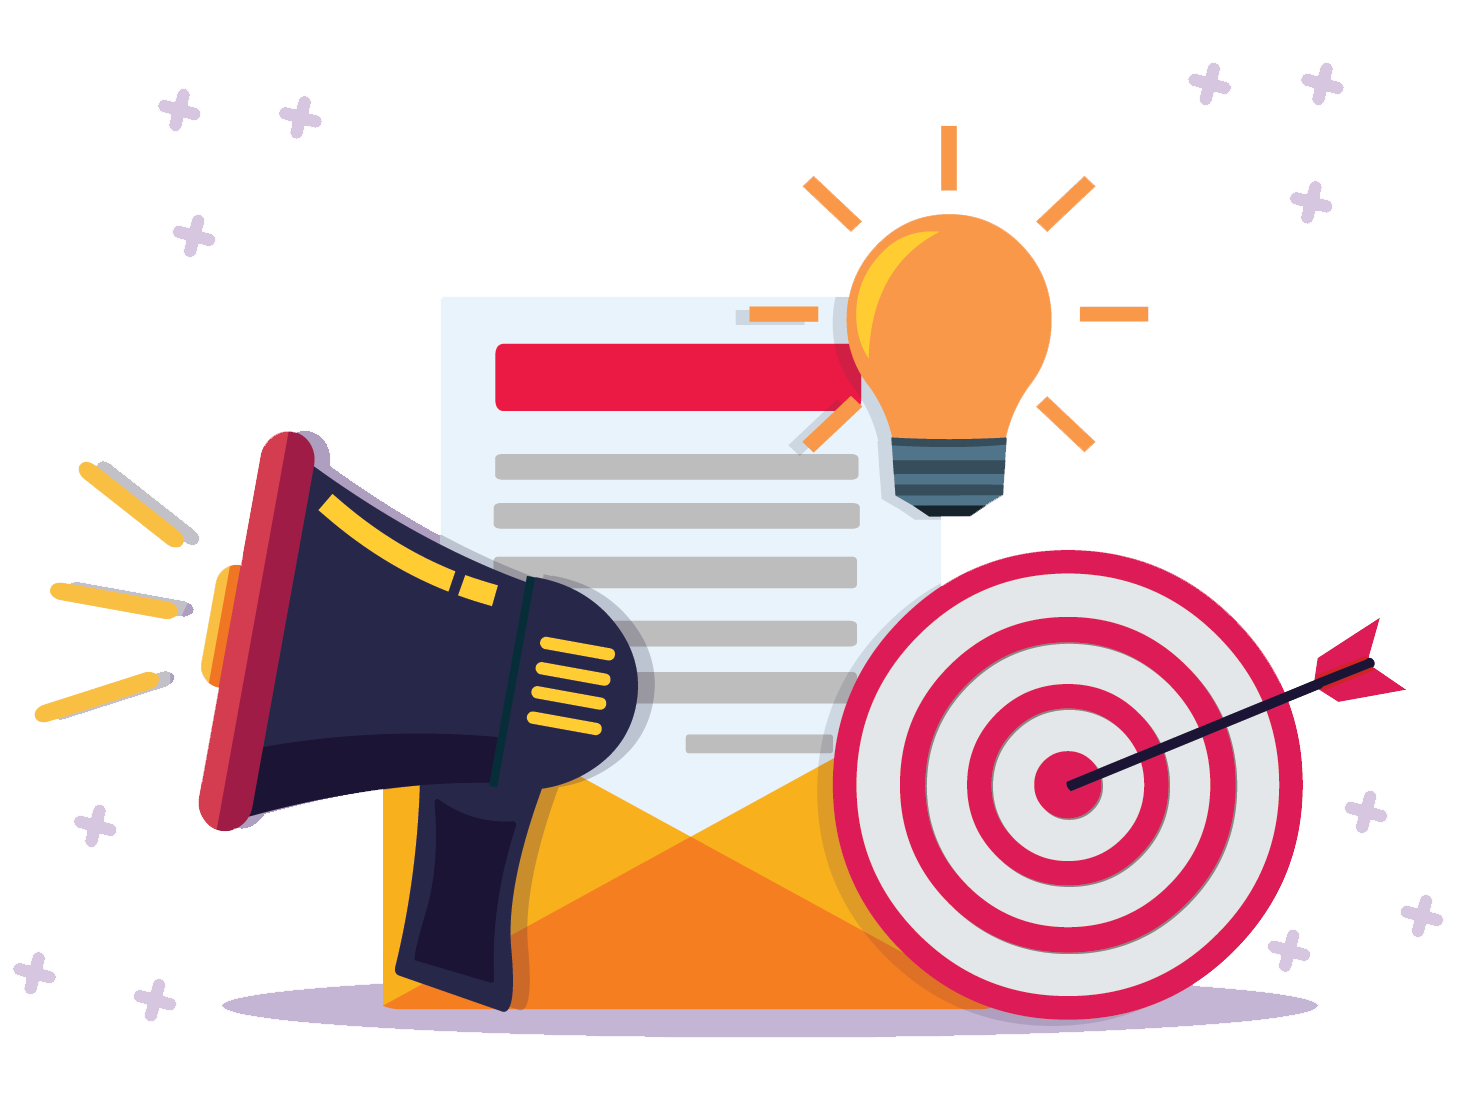 Illustration of a megaphone, email letter, target, arrow, and lightbulb symbolizing effective email marketing strategies and creative ideas